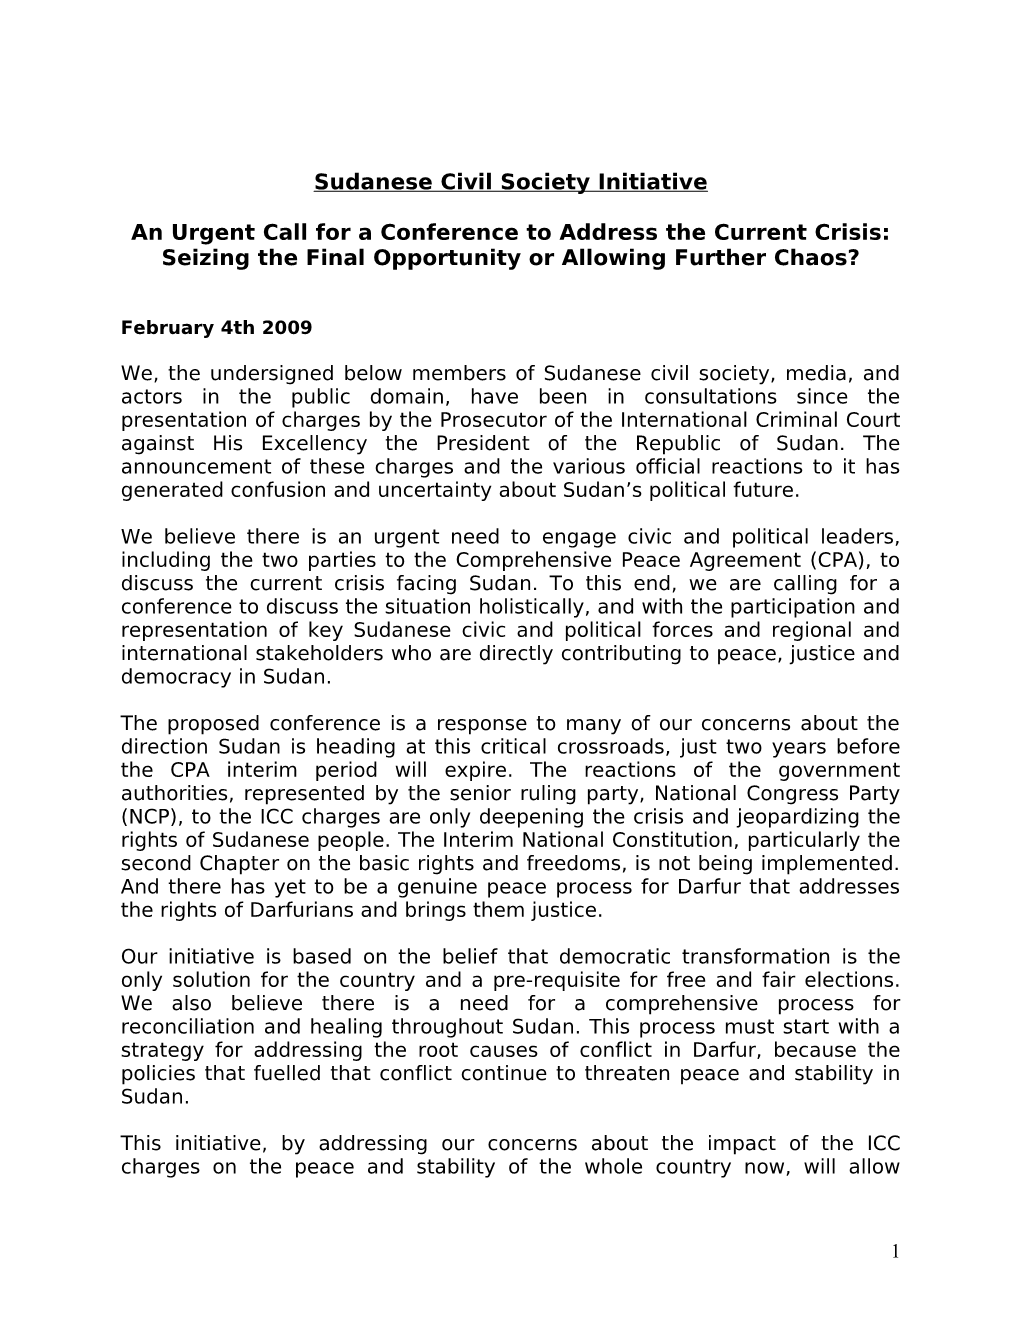 Statement of the Sudanese Civil Society Initiative, 4 February 2009